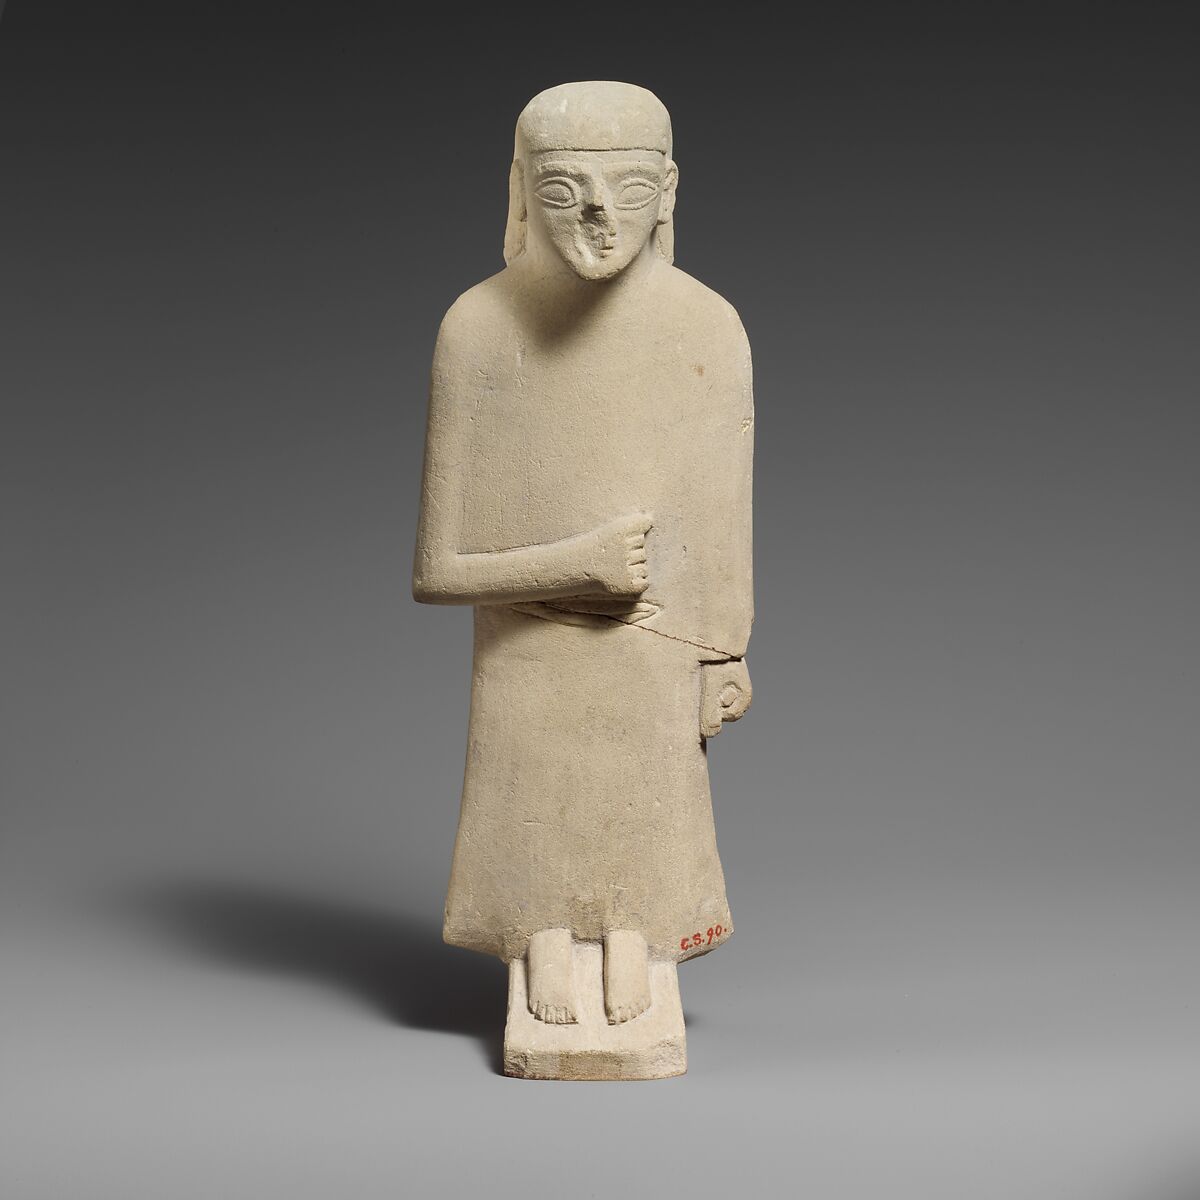 Limestone statuette of a male votary with a long garment and a plain headdress, Limestone, Cypriot 